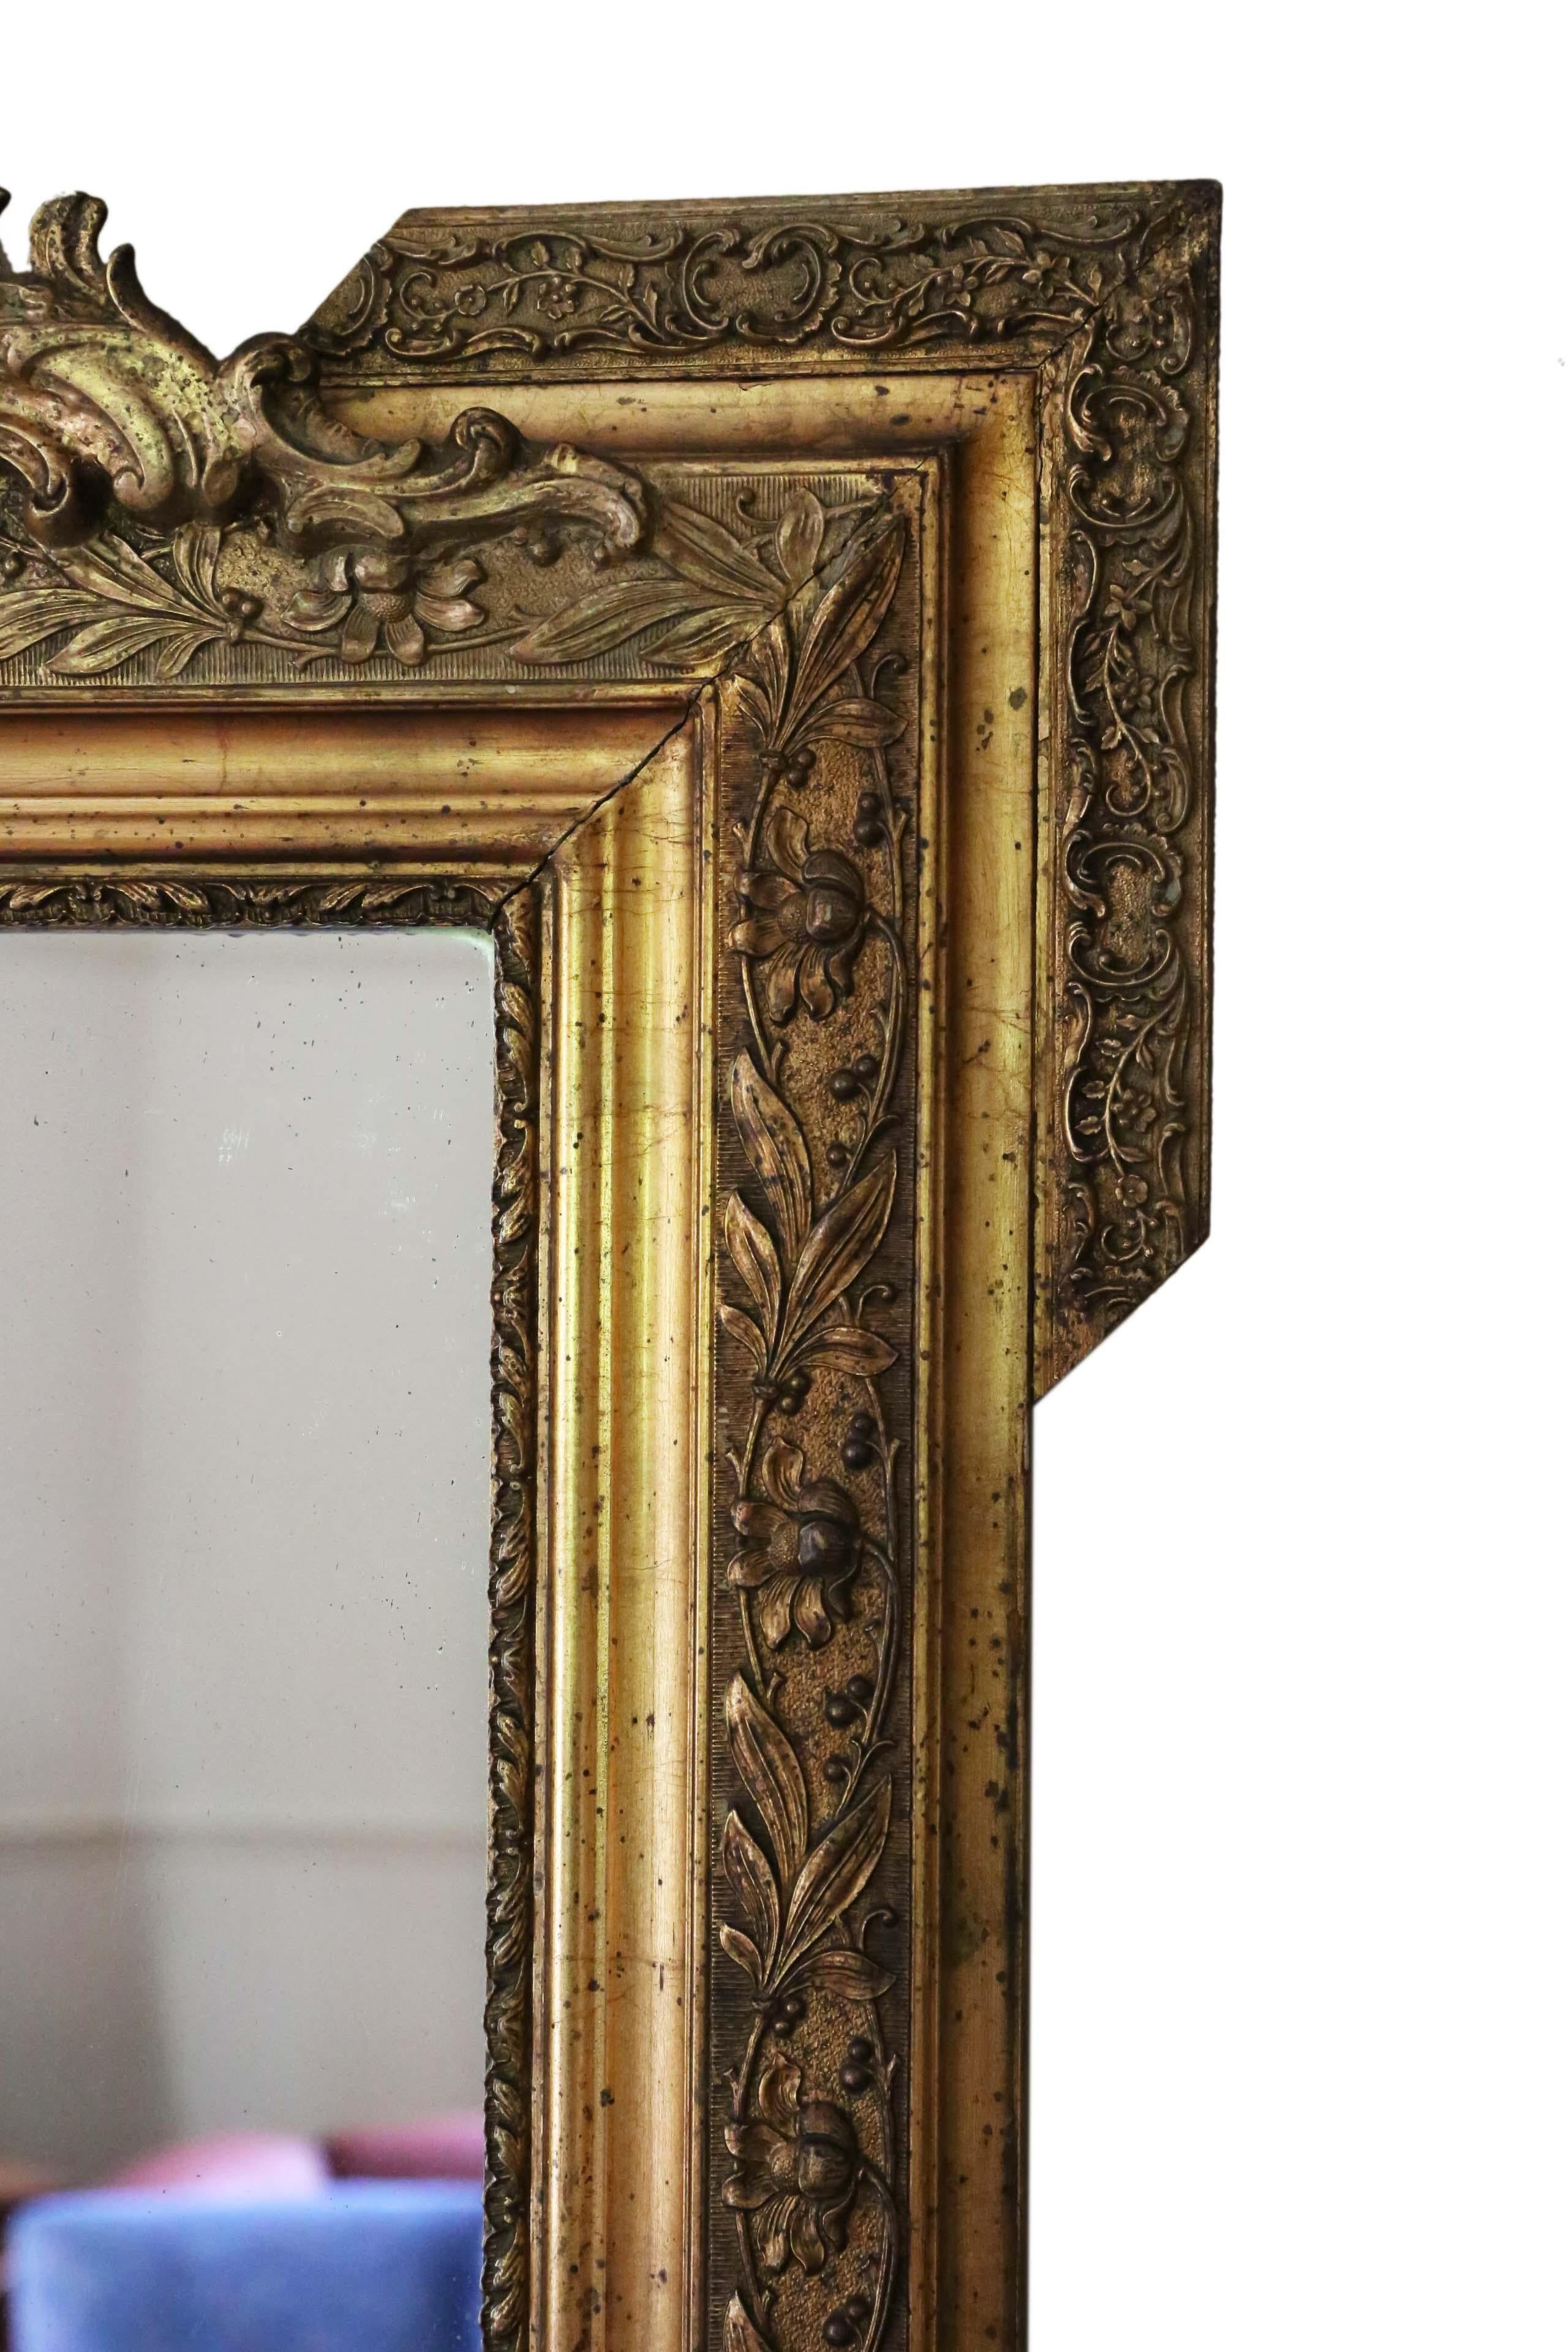 Antique rare fine quality gilt overmantle or wall mirror circa 1900. Lovely charm and elegance. Original finish.

Great finely detailed frame in very good condition, with original gilding.

An impressive and rare design, that would look amazing